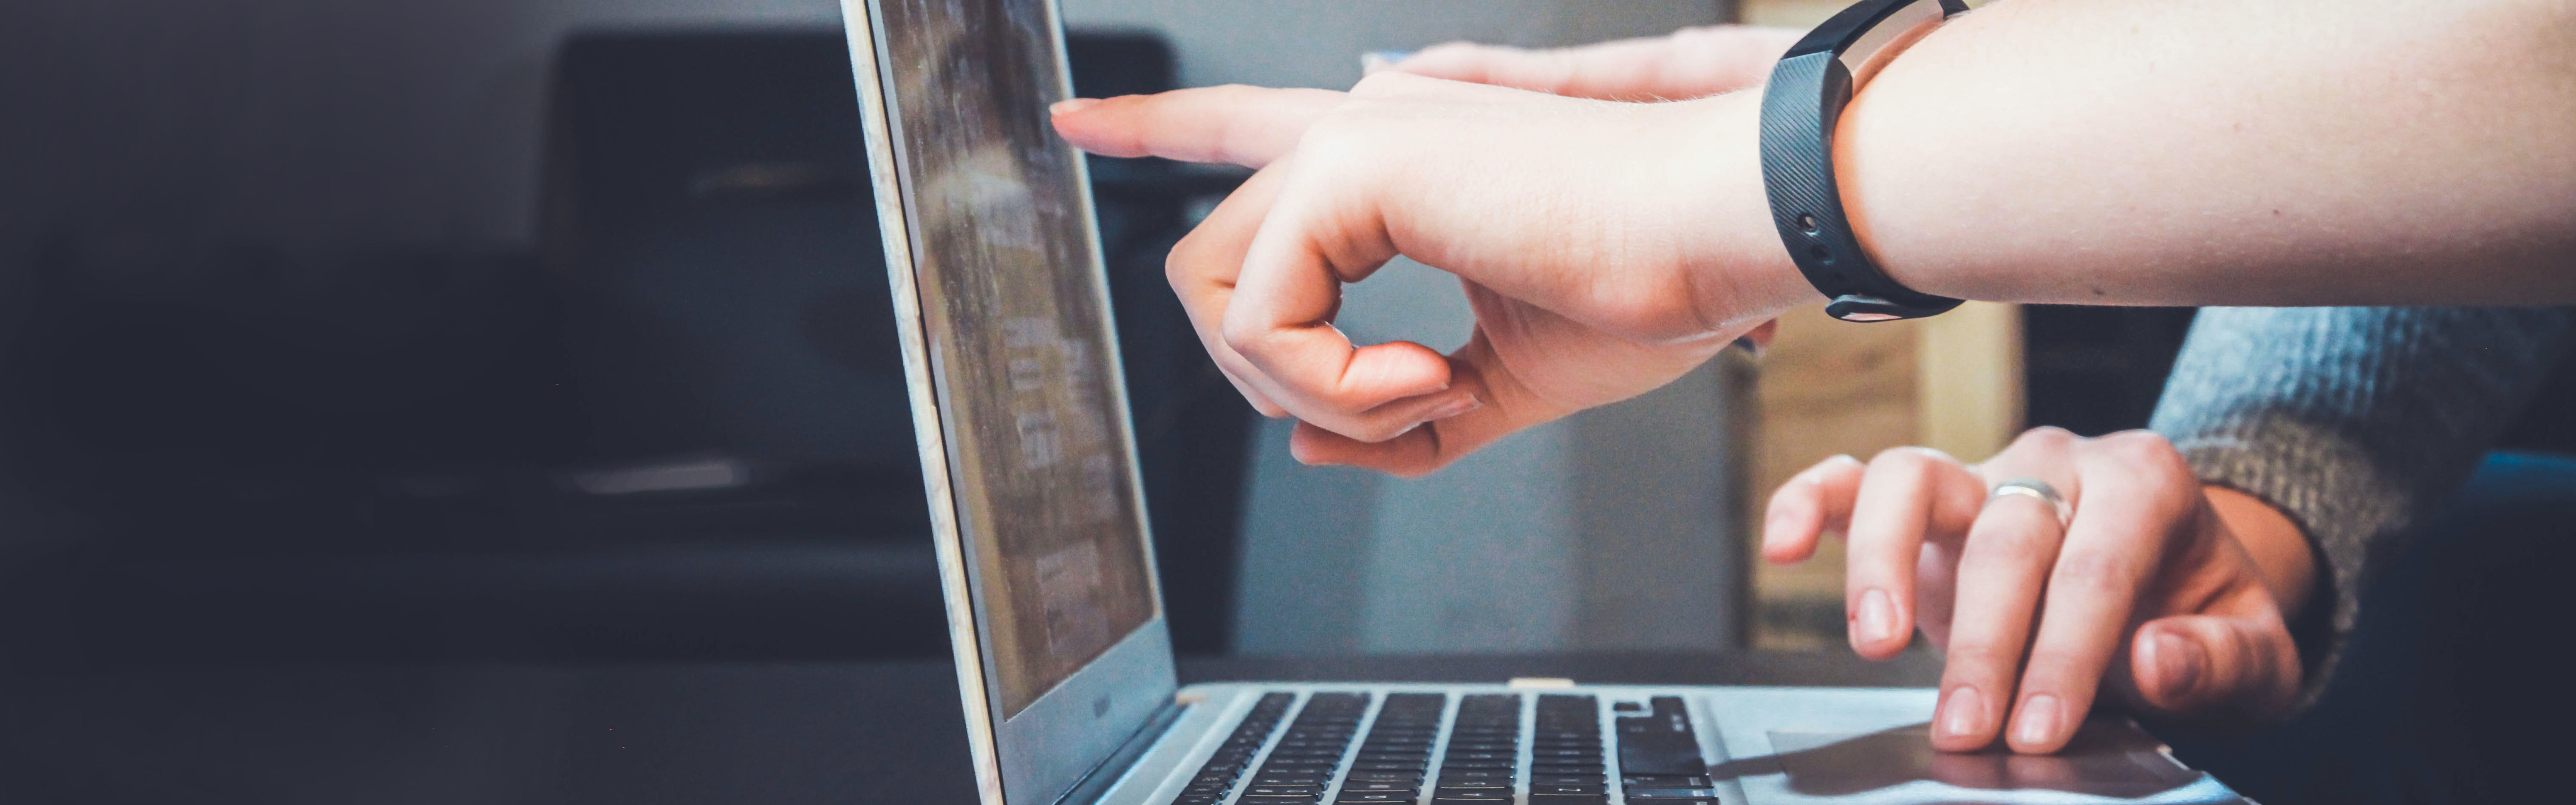 Stock photograph of persons hand pointing at a laptop screen, another hand rests on the keyboard